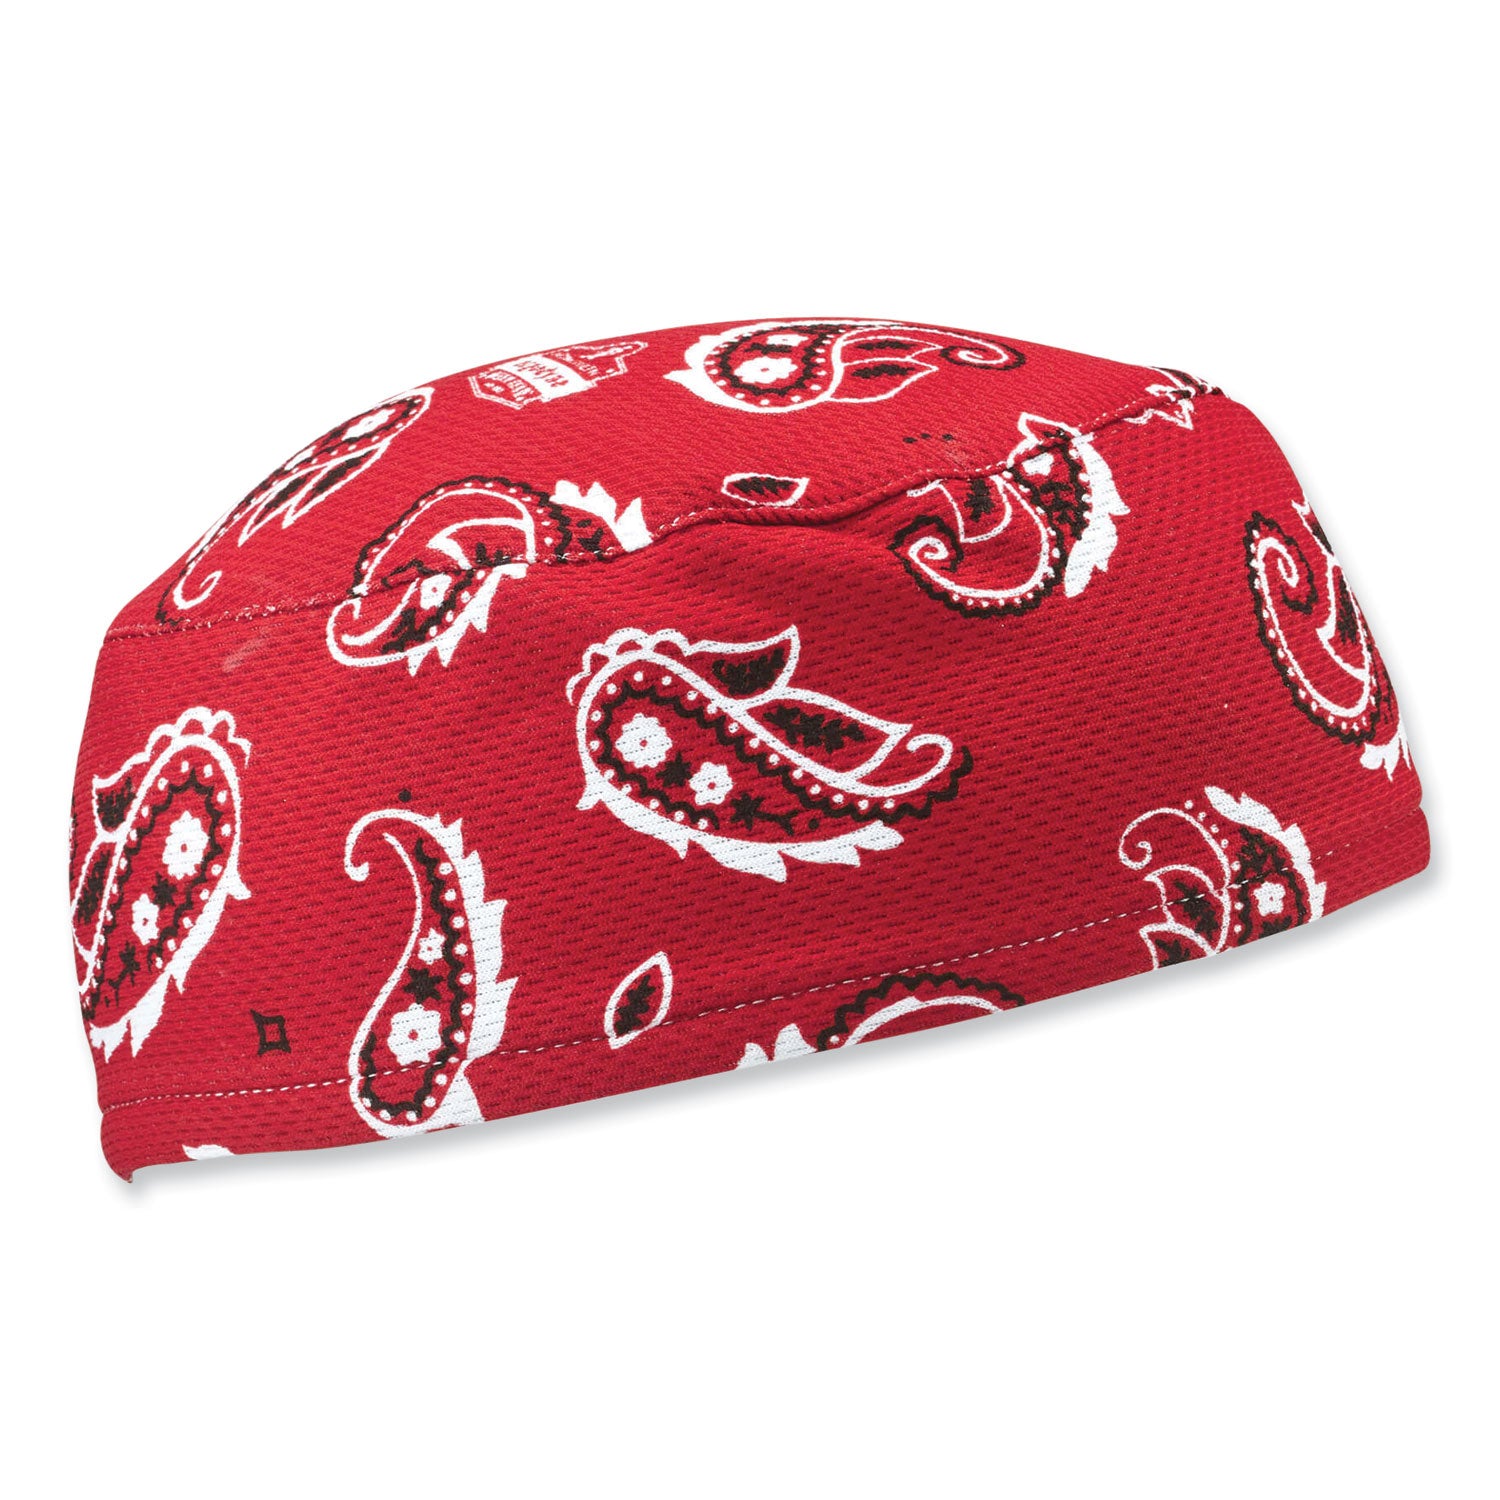 chill-its-6630-high-performance-terry-cloth-skull-cap-polyester-one-size-fits-most-red-western-ships-in-1-3-business-days_ego12508 - 1